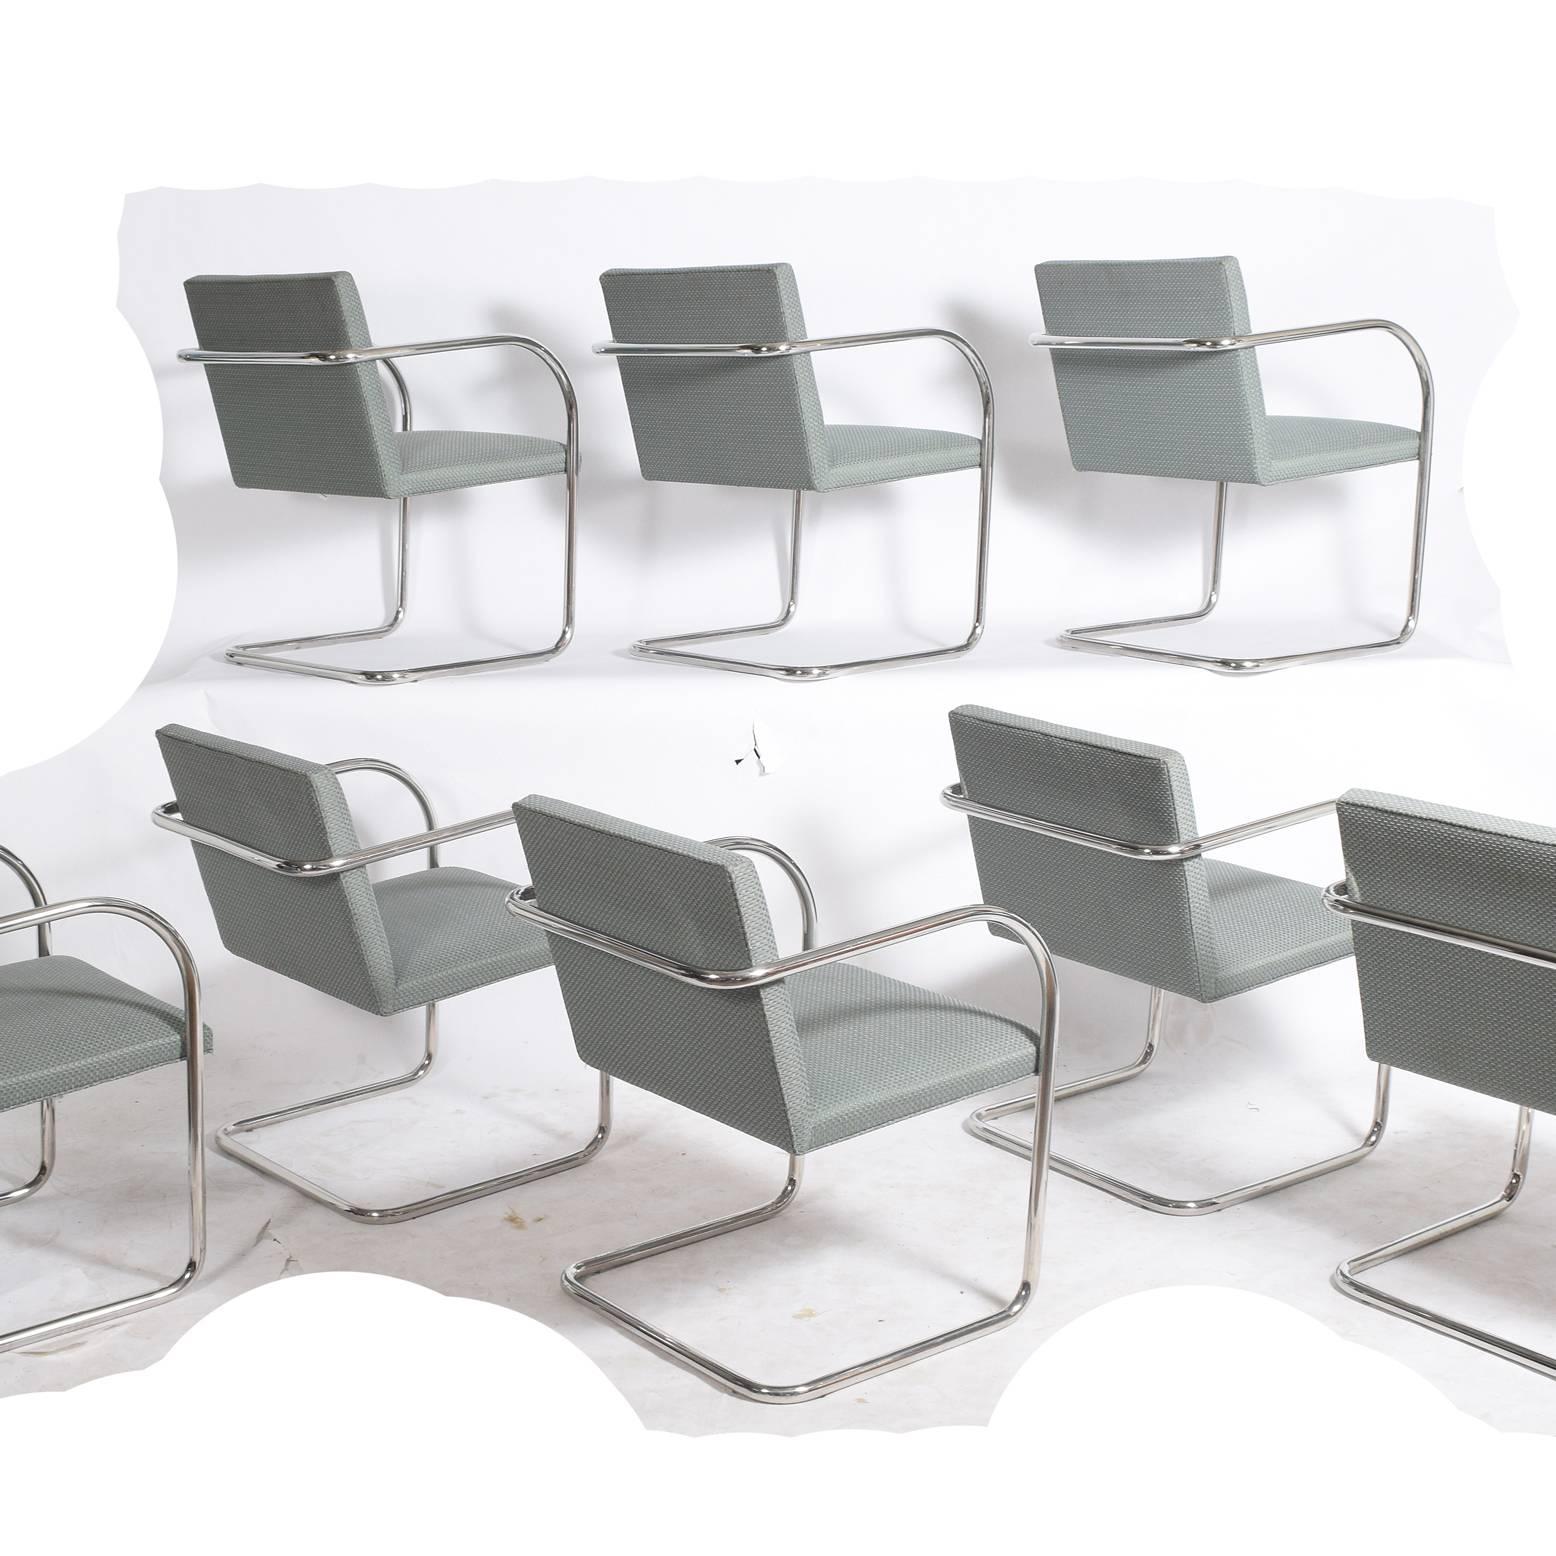 American Set of Eight Stainless Steel Brno Chairs by Mies van der Rohe for Knoll Inc.